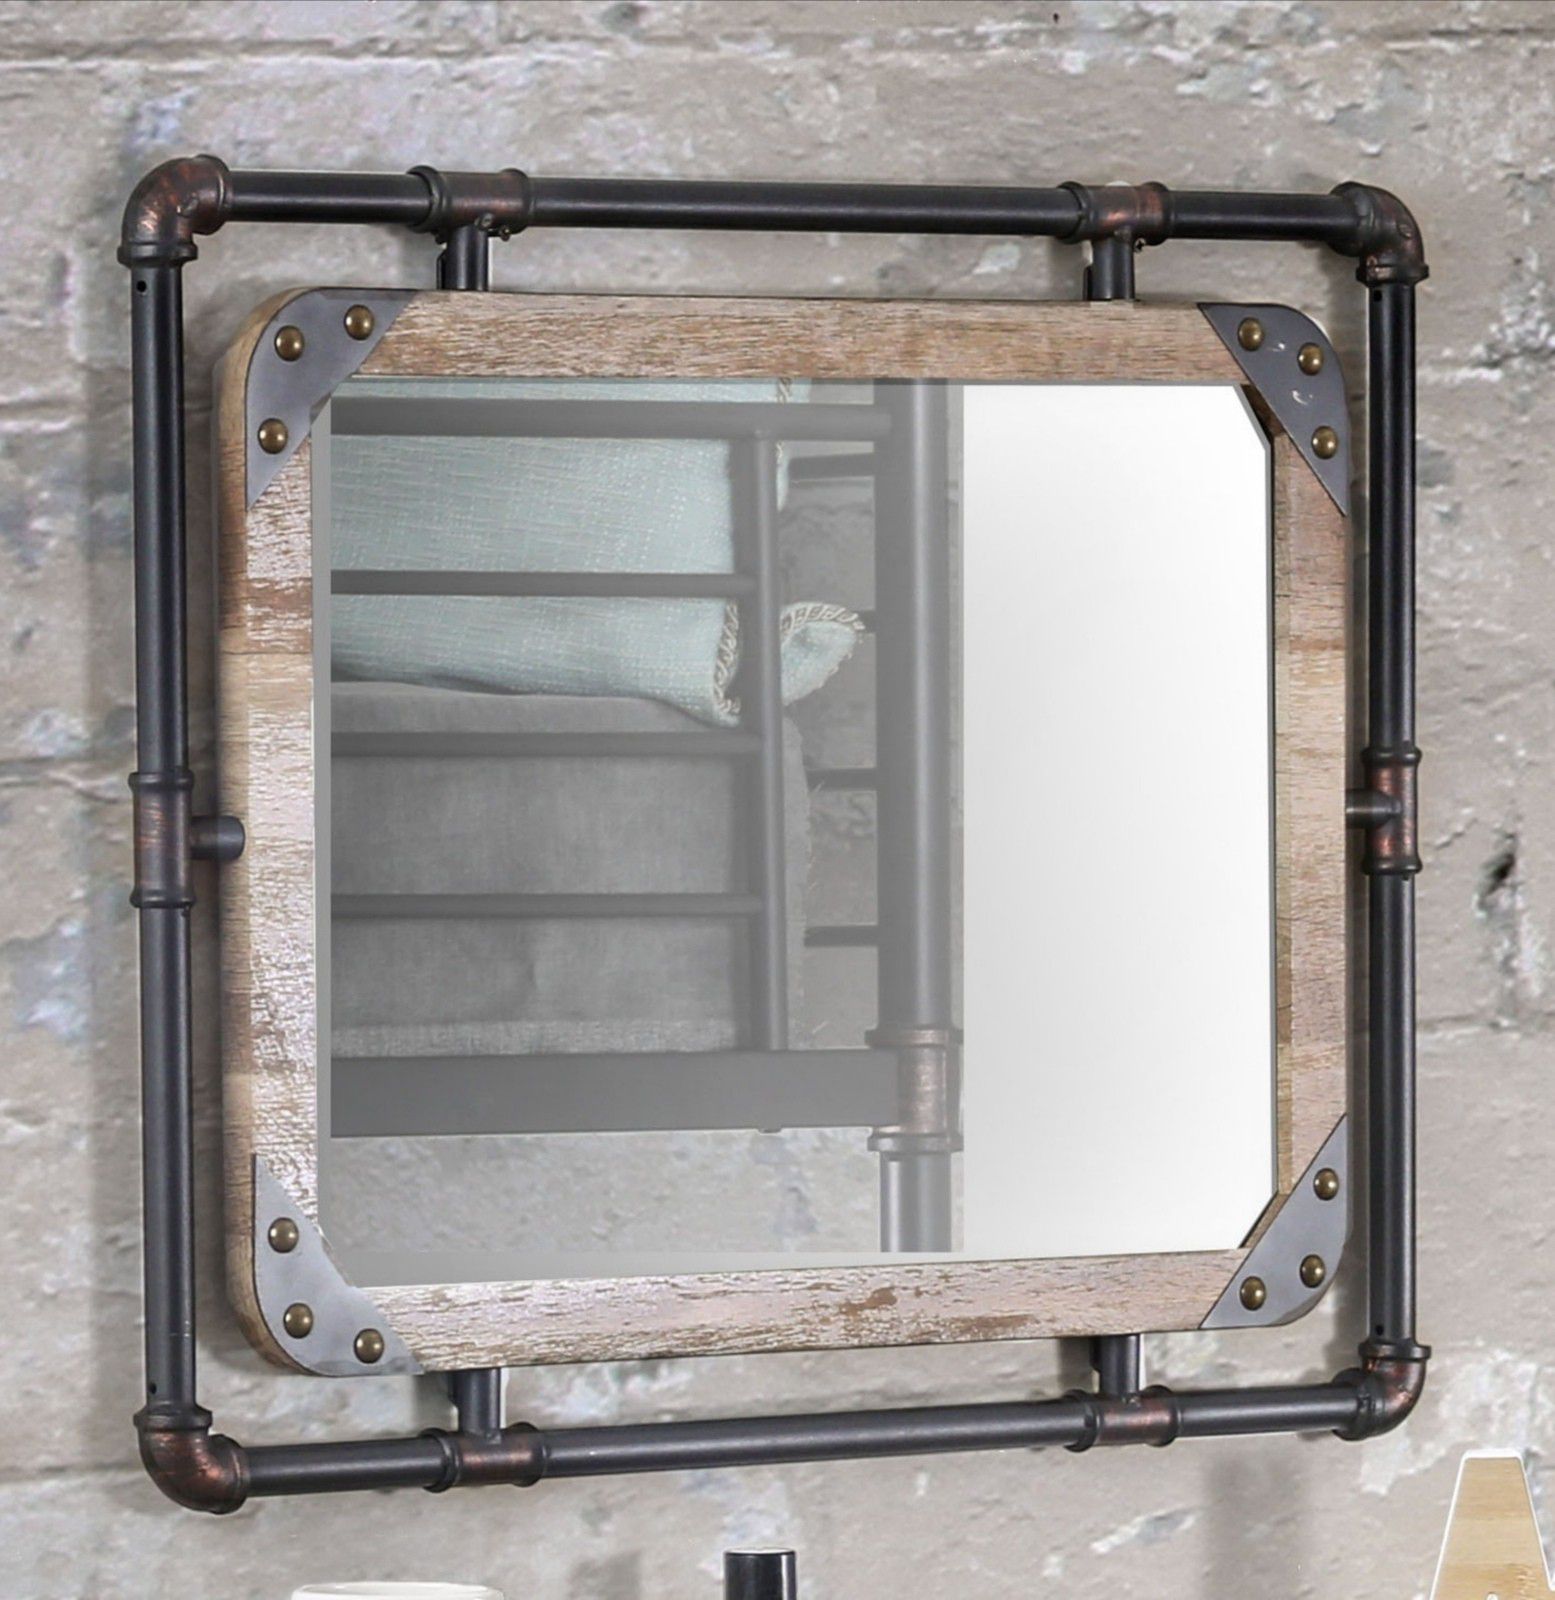 Furniture of America Stockholm Industrial Decorative Wall Mirror 32"x24"